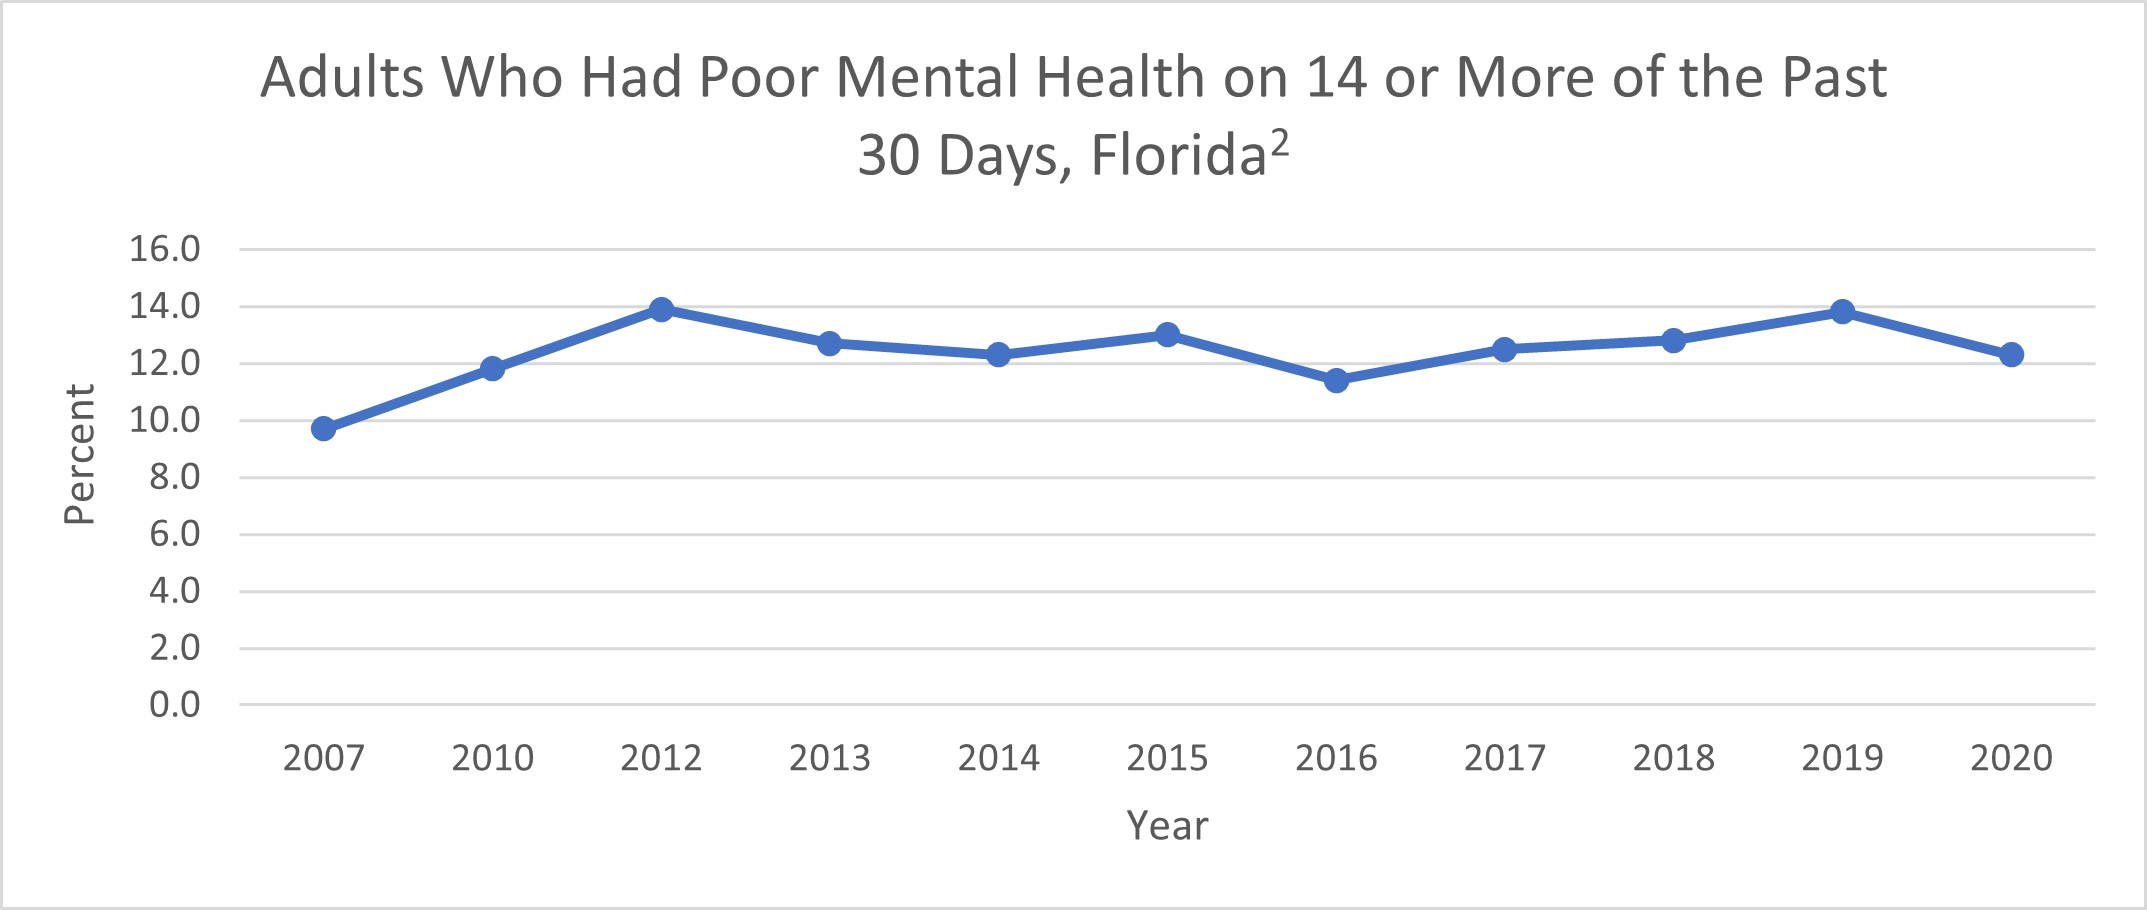 Adults Who Had Poor Mental Health on 14 or More of the Past 30 Days, Florida